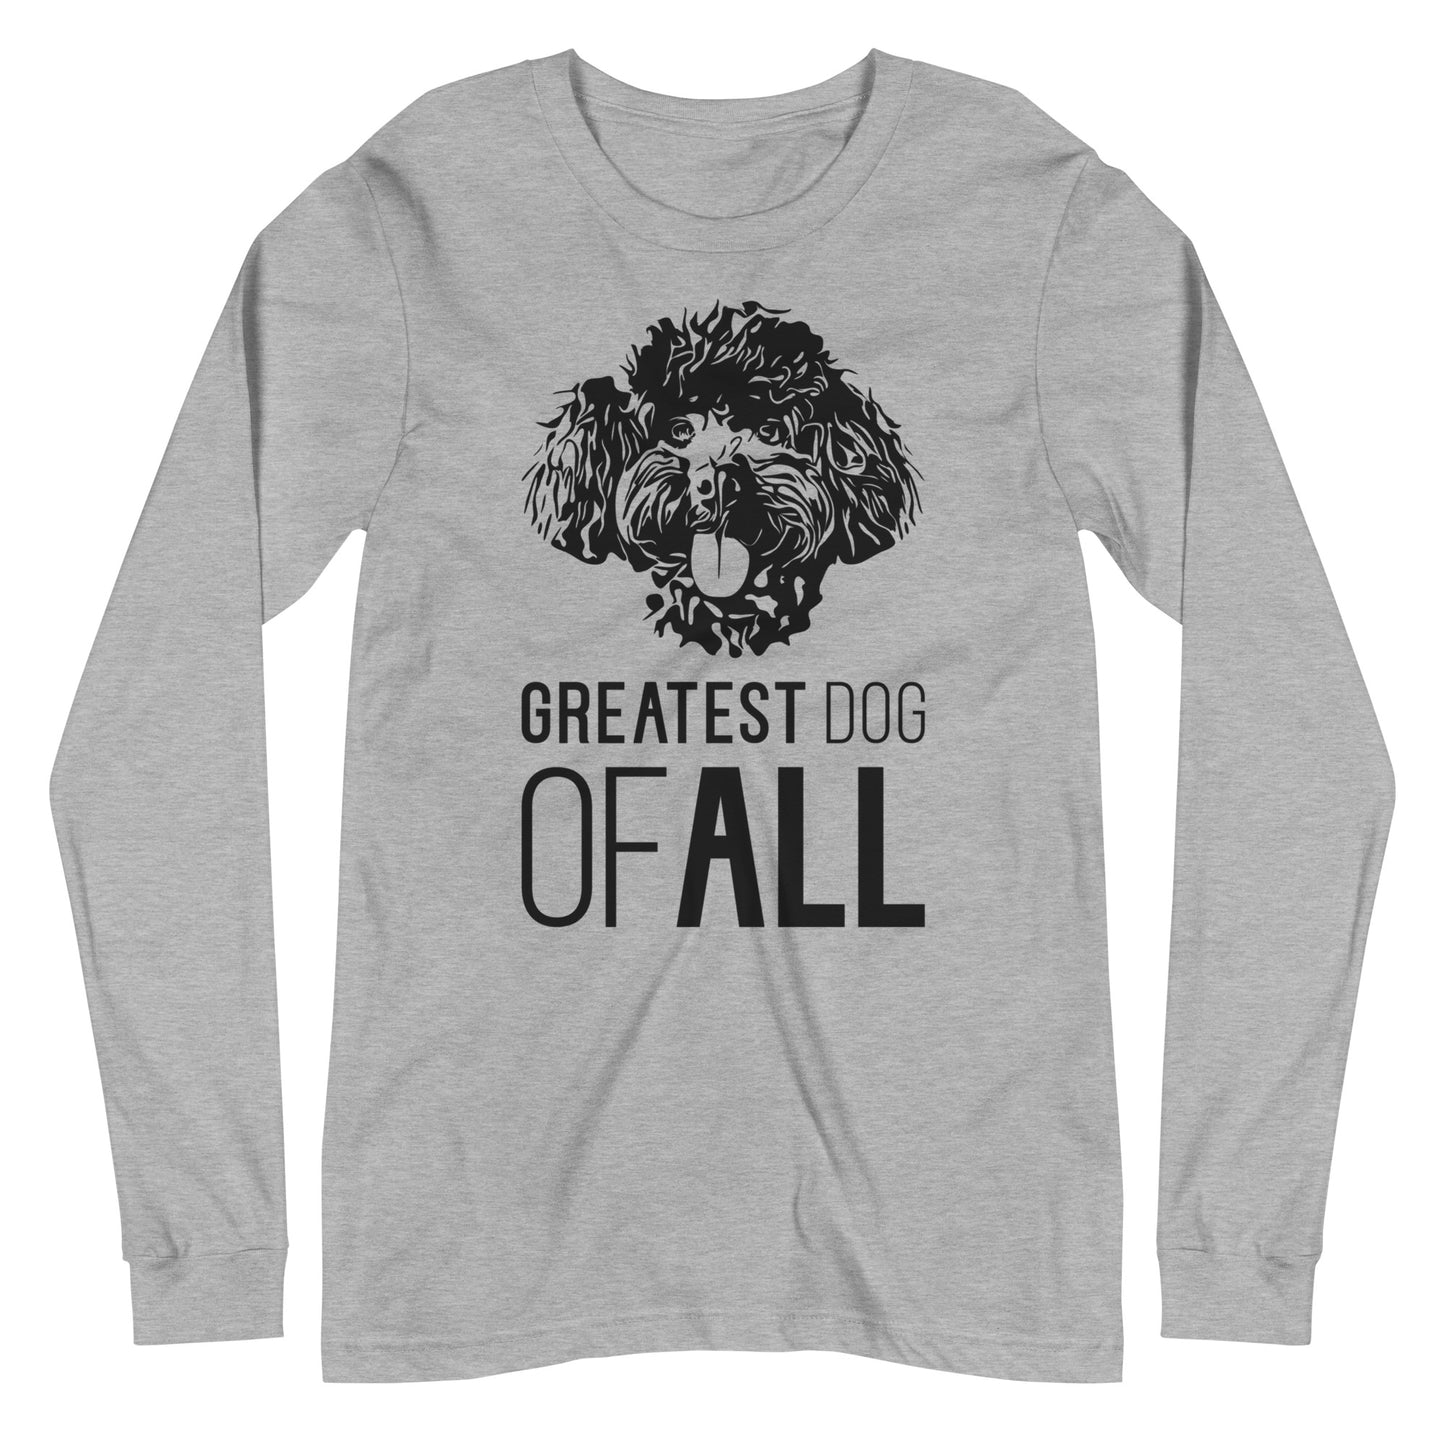 Black Toy Poodle face silhouette with Greatest Dog of All caption on unisex athletic heather long sleeve t-shirt